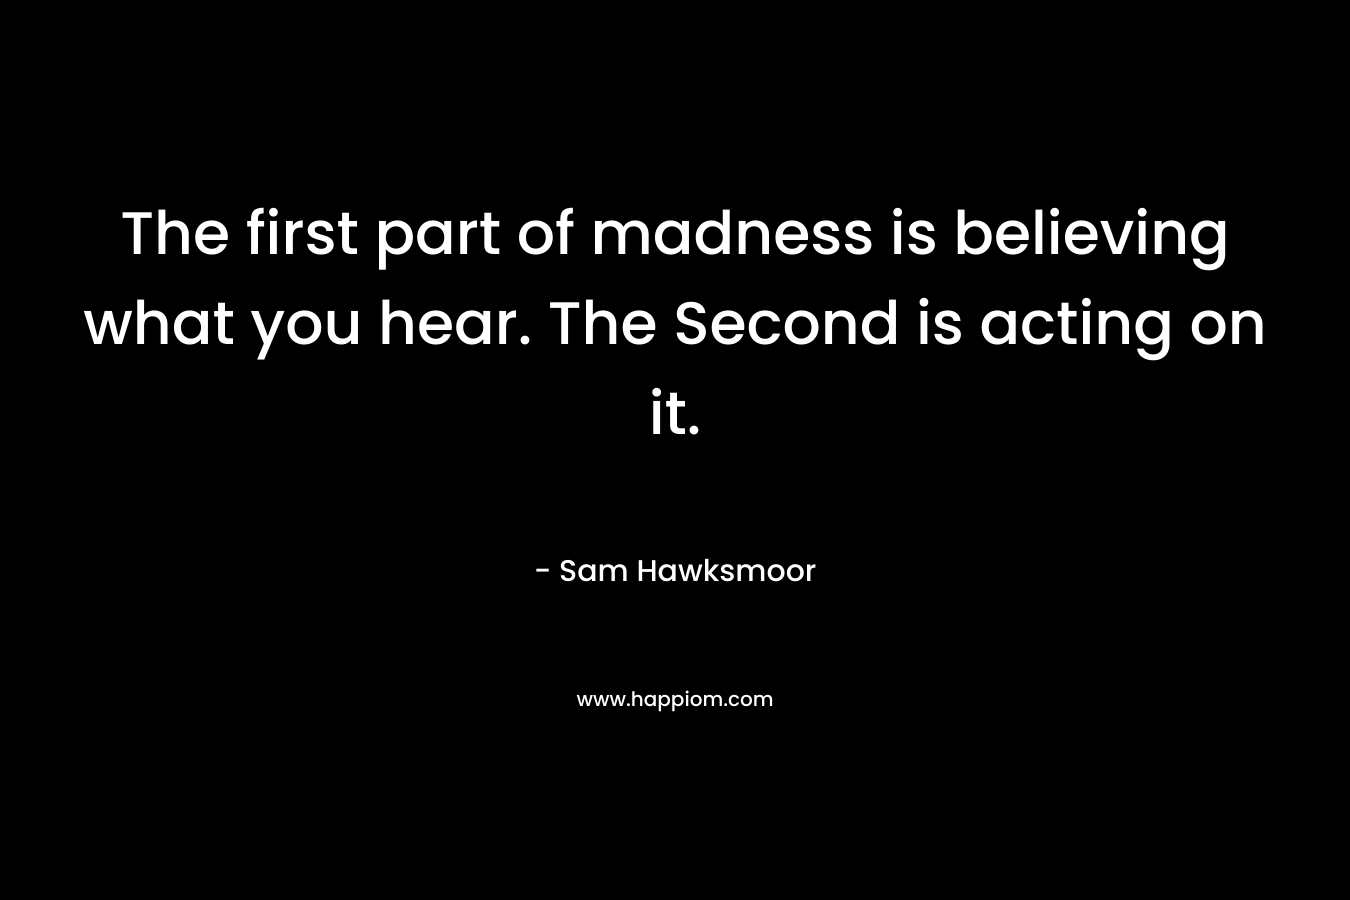 The first part of madness is believing what you hear. The Second is acting on it. – Sam Hawksmoor